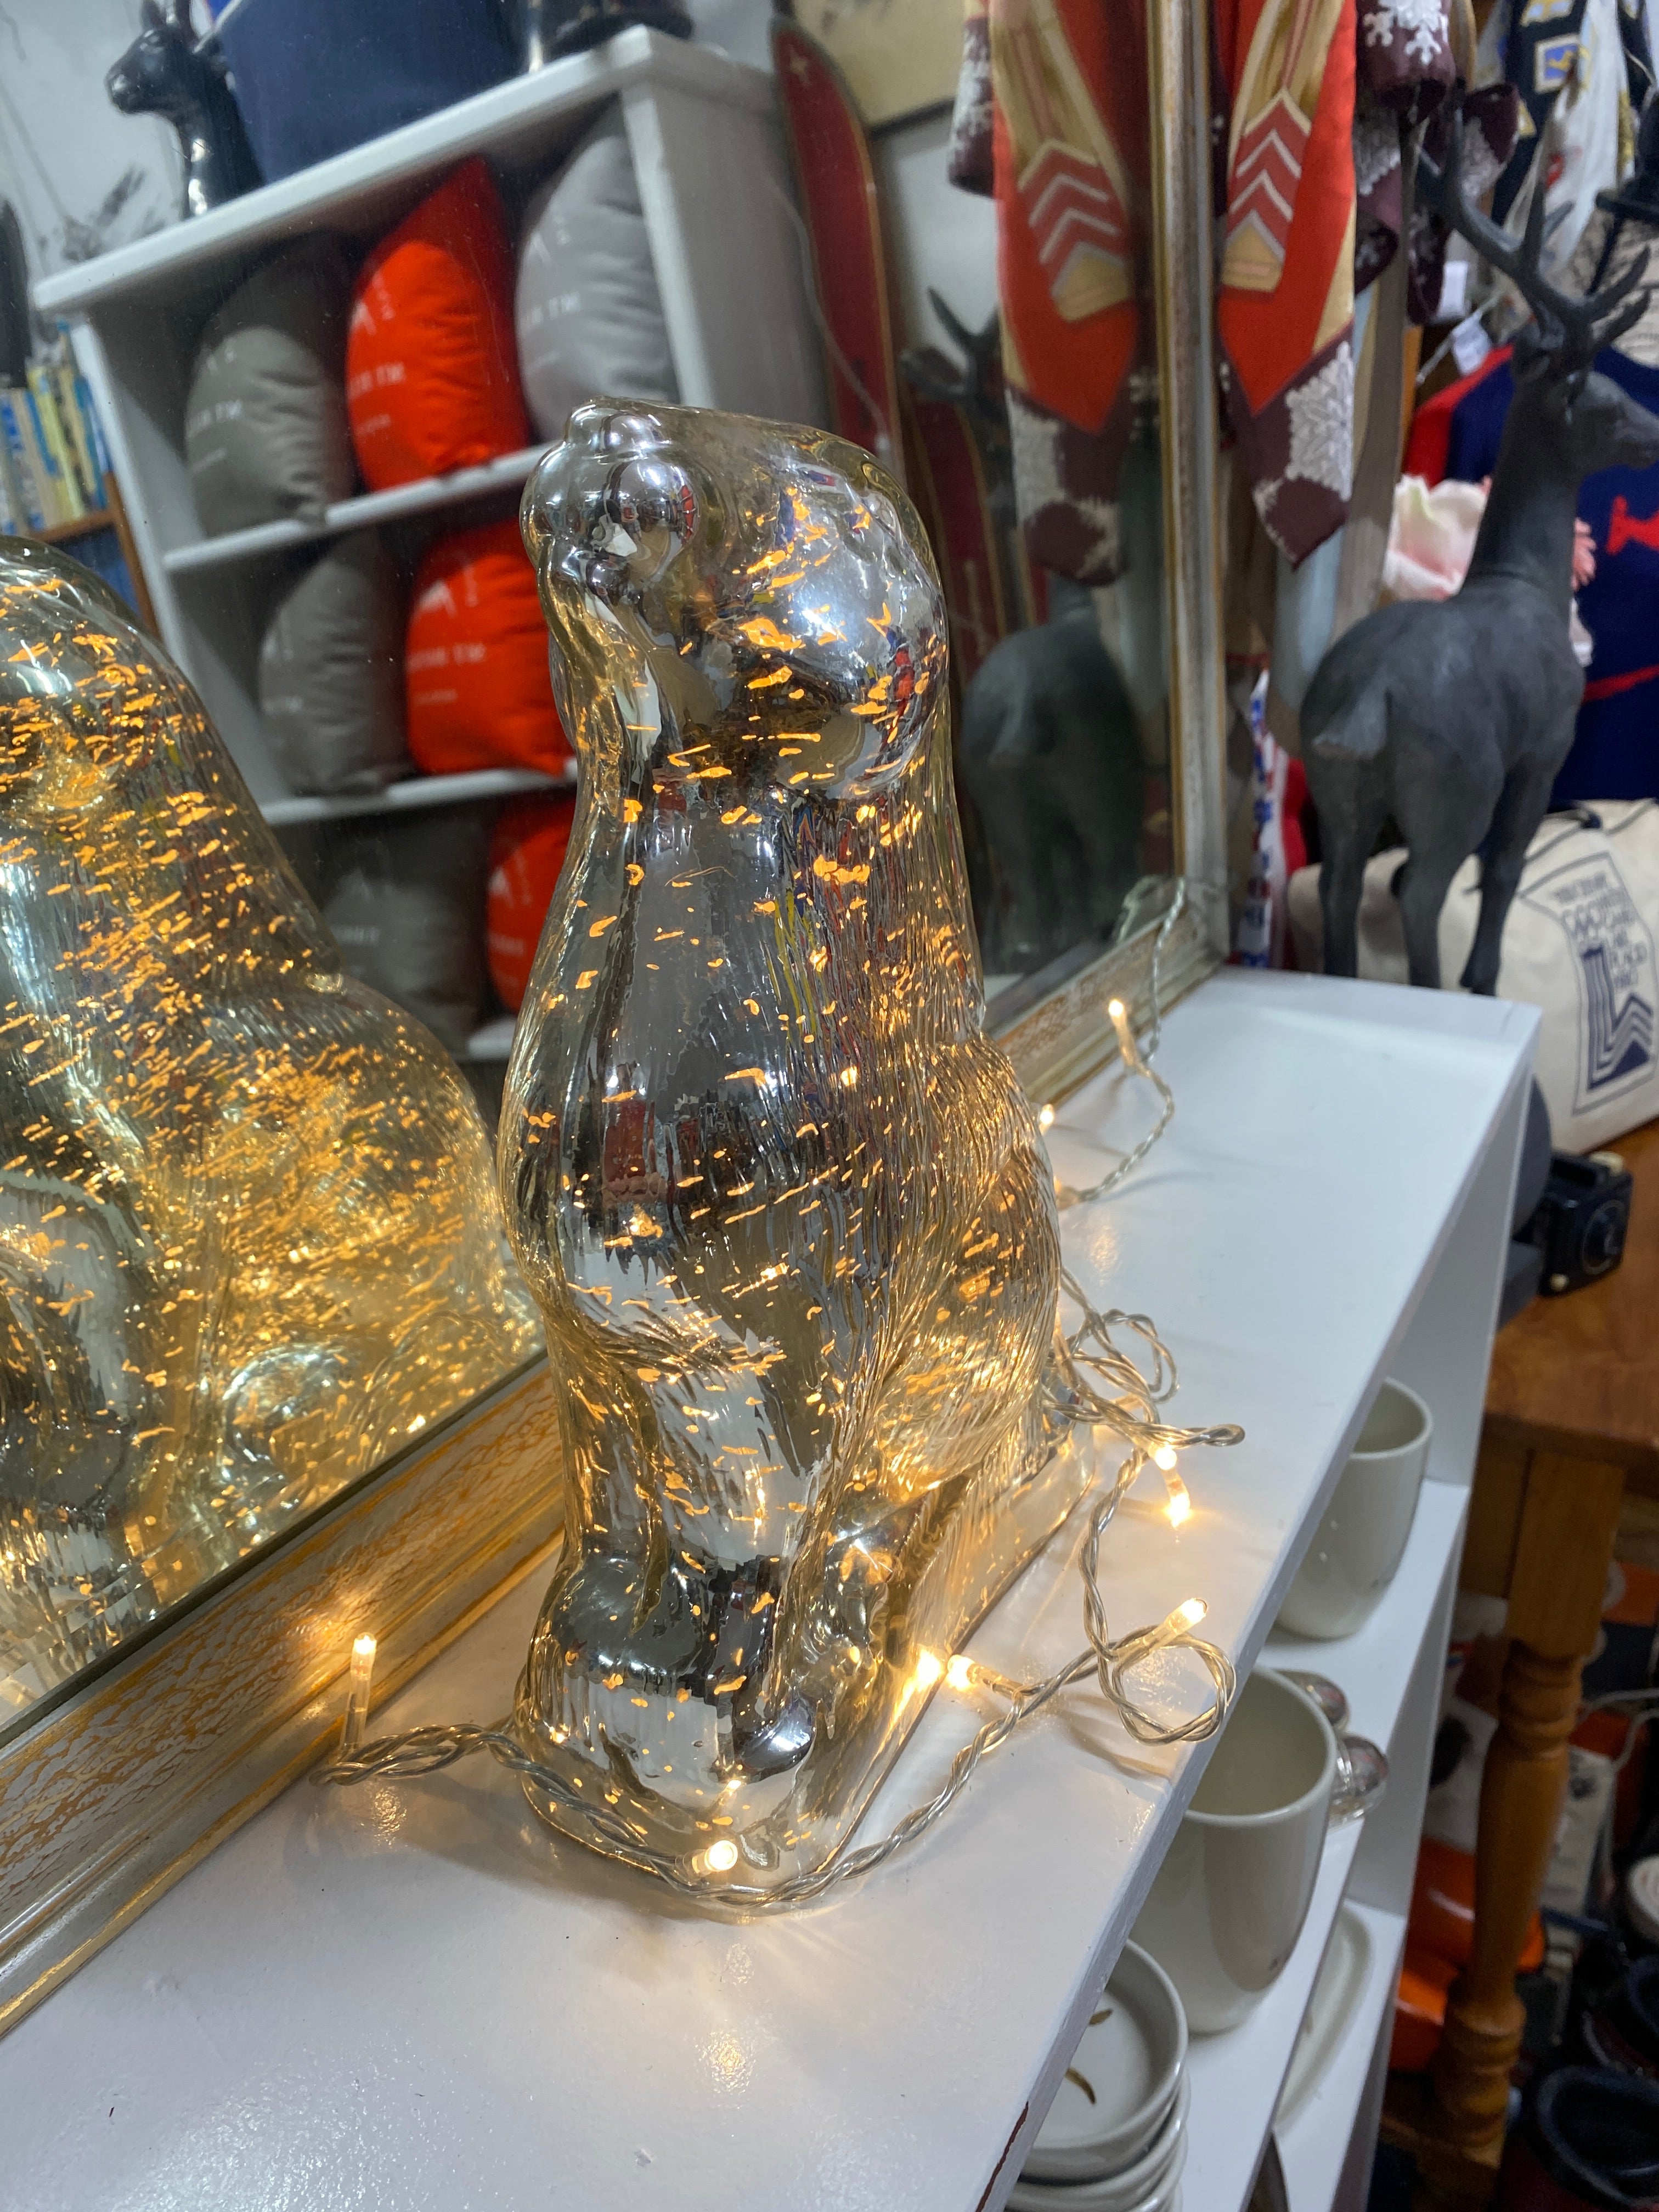 Image shows a silver glass rabbit with fairy lights switched on and displayed externally. The rabbit is sitting on its haunches with it's nose in the air, against a mirror backdrop reflecting vintage snow clothing, cushions and ornaments & sitting on a white bench. Rabbit viewed from the front.